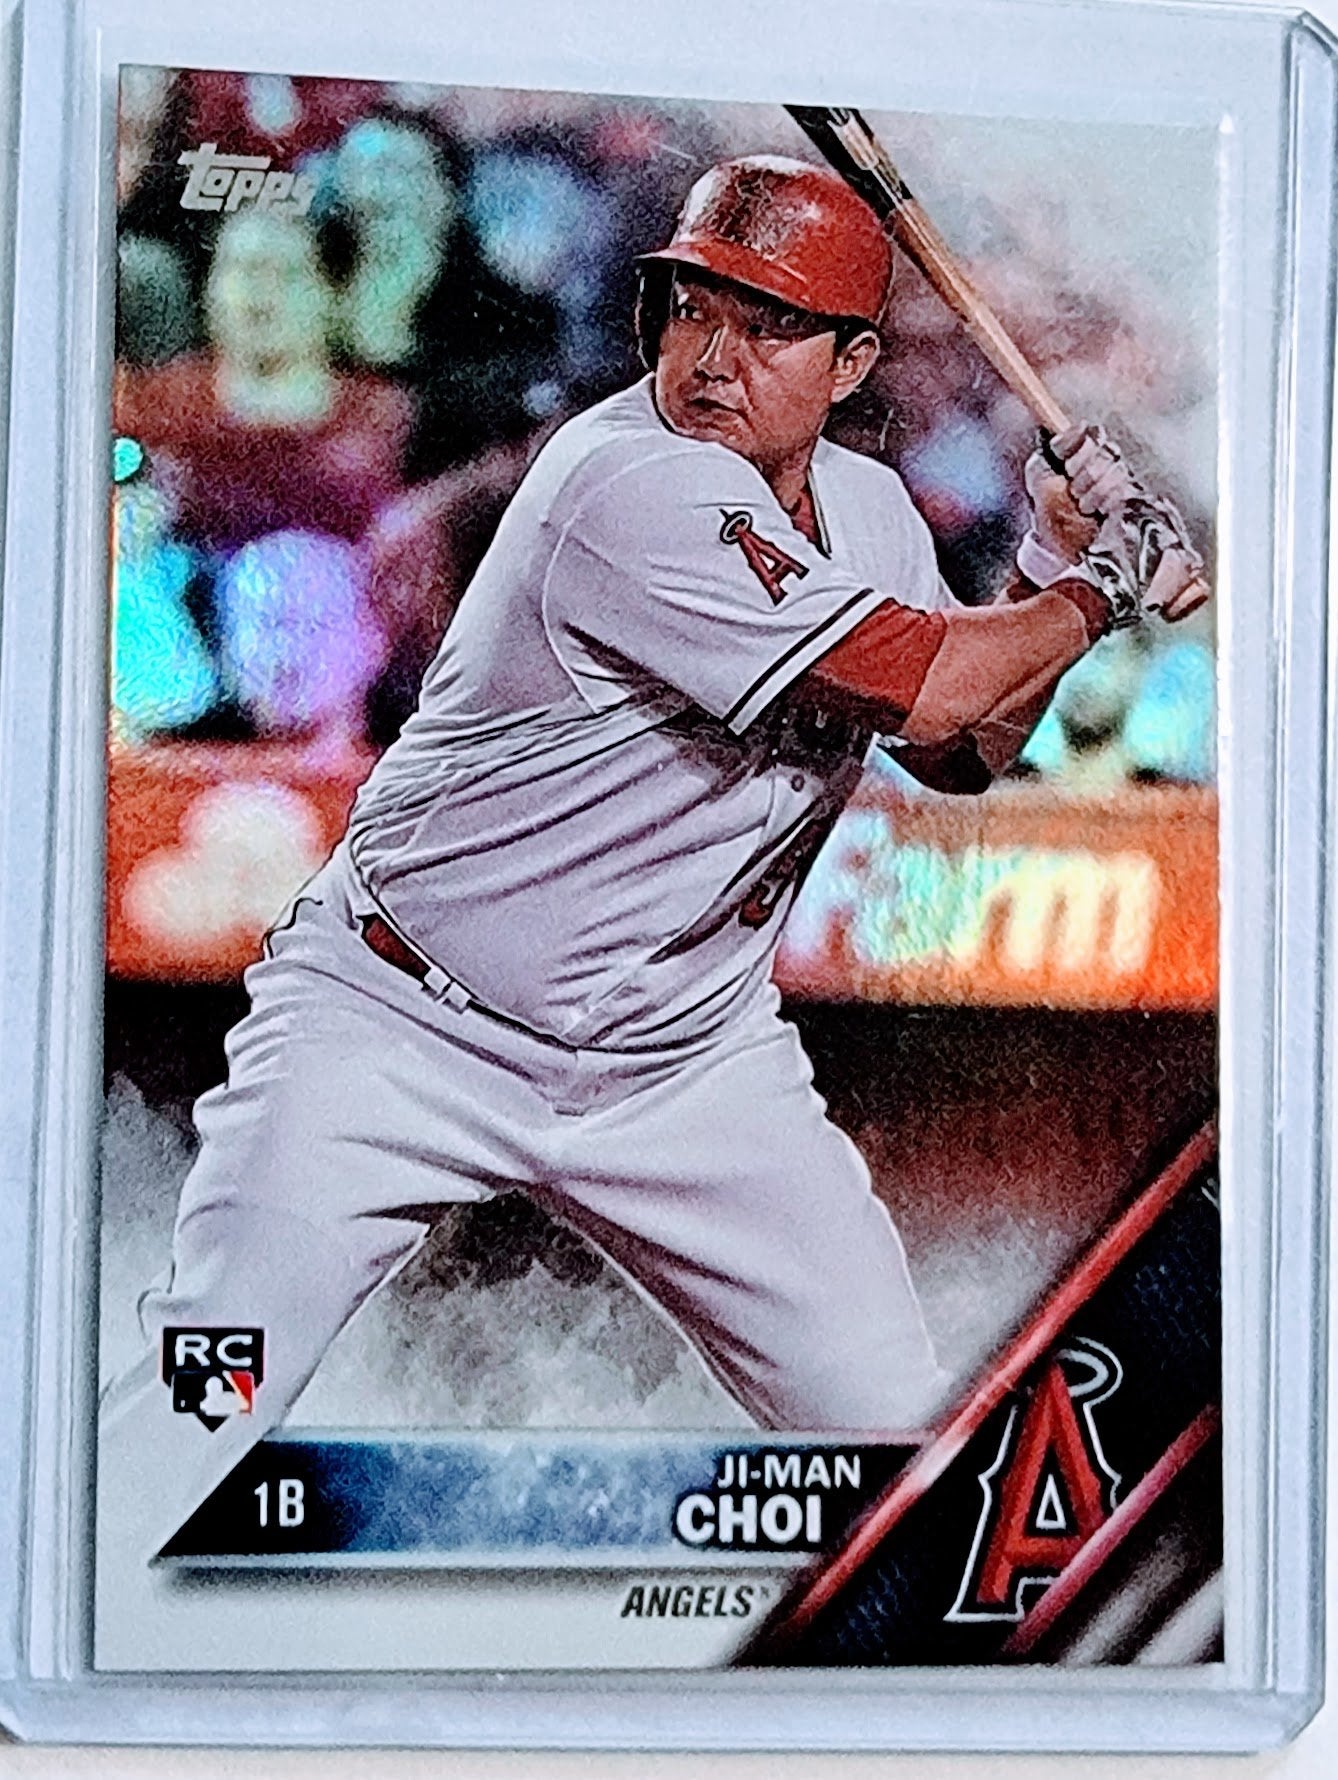 2016 Topps Ji-man Choi Rookie Foil Refractor Rookie Baseball Card TPTV simple Xclusive Collectibles   